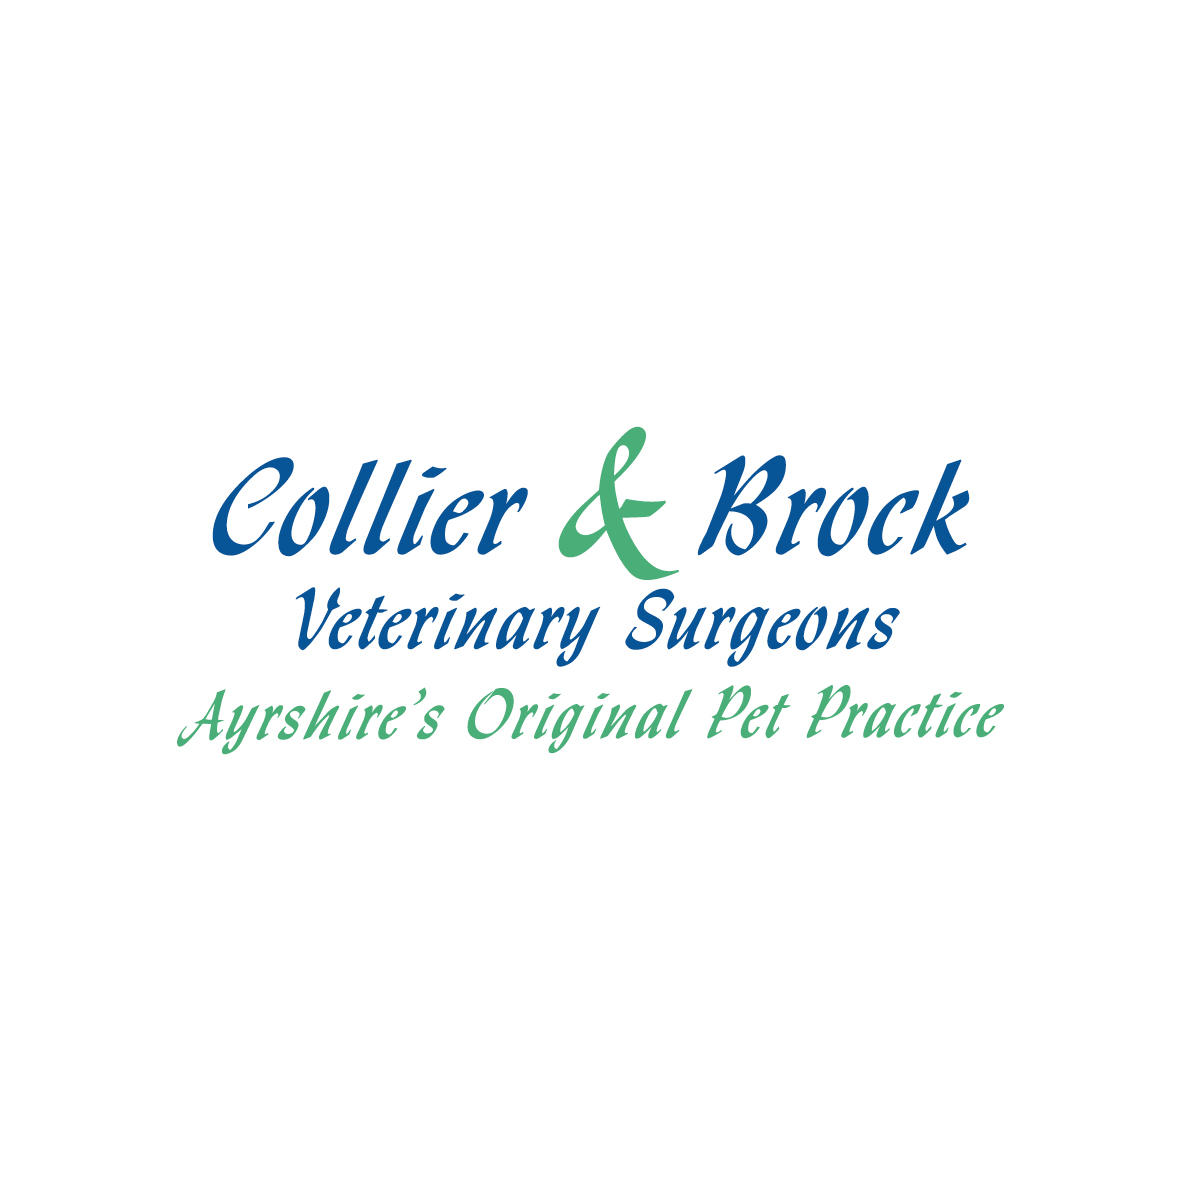 Collier and Brock Vets, Troon Troon 01292 311988